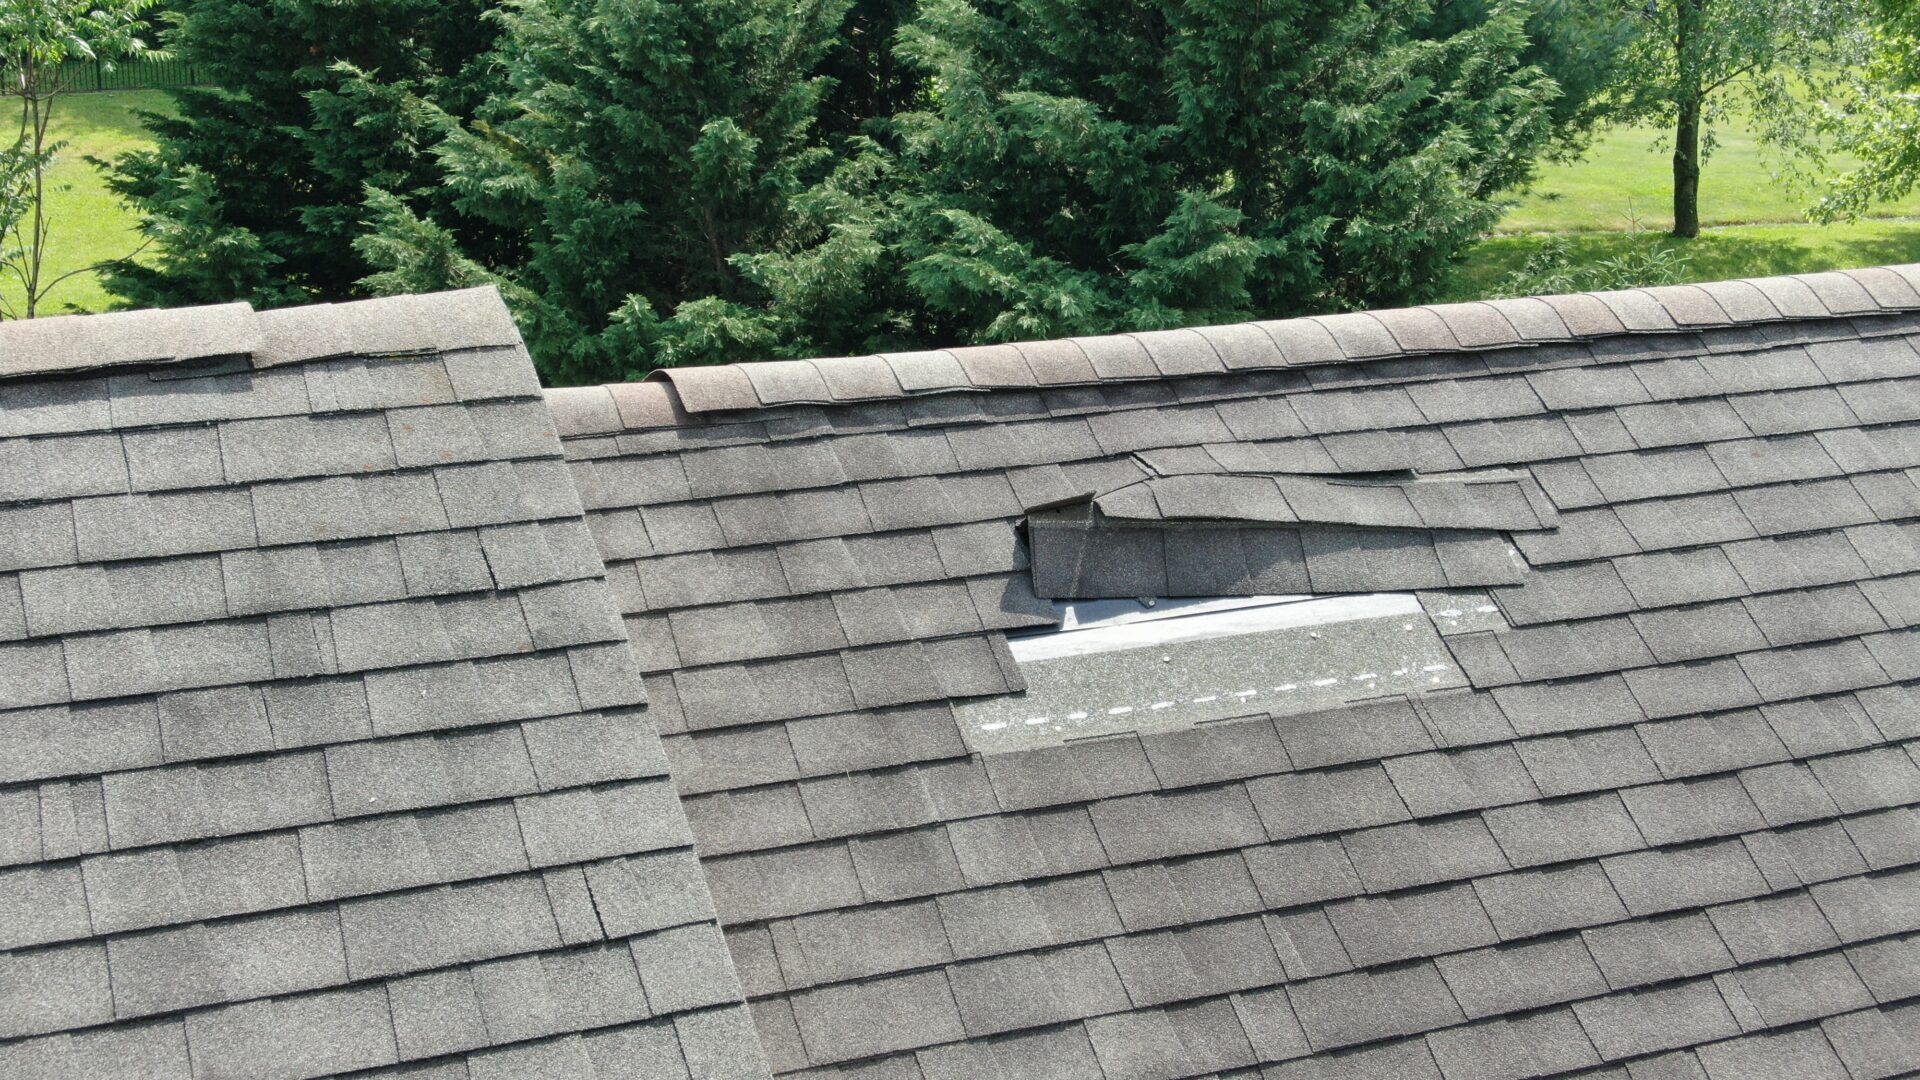 A Roof Storm Damage Is An Alarming Situation For Homeowner To Repair It